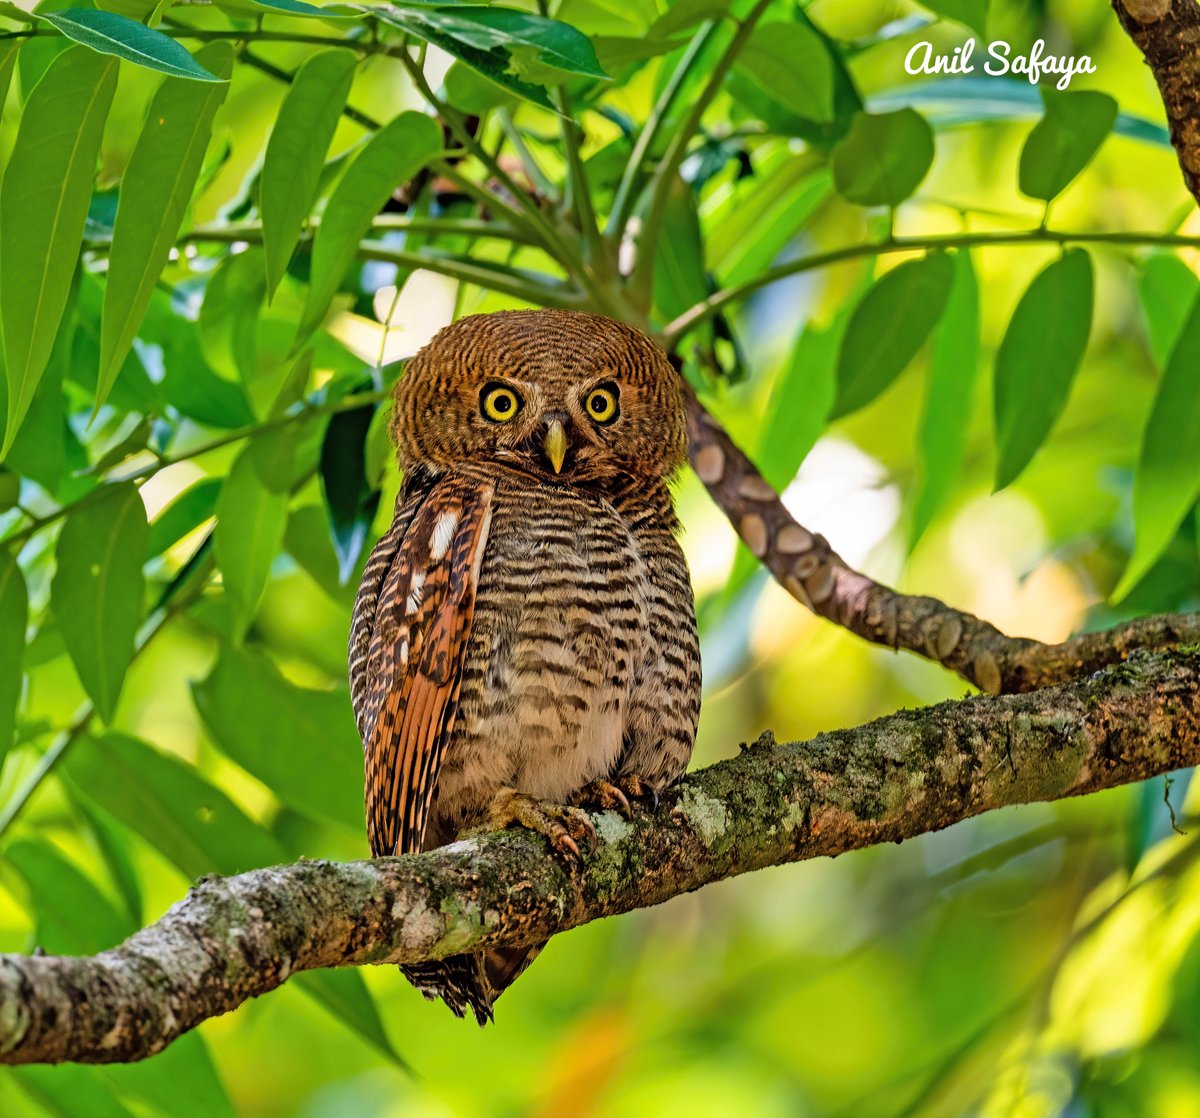 Forest owlet- listed as Endangered on the IUCN Red List since 2018, Threatened foremost by deforestation.
 #incrediblebirding #TwitterNatureCommunity #IndiAves #NaturePhotography #BirdsPhotography #BirdTwitter #birdwatching #BBCWildlifePOTD #NatureBeauty